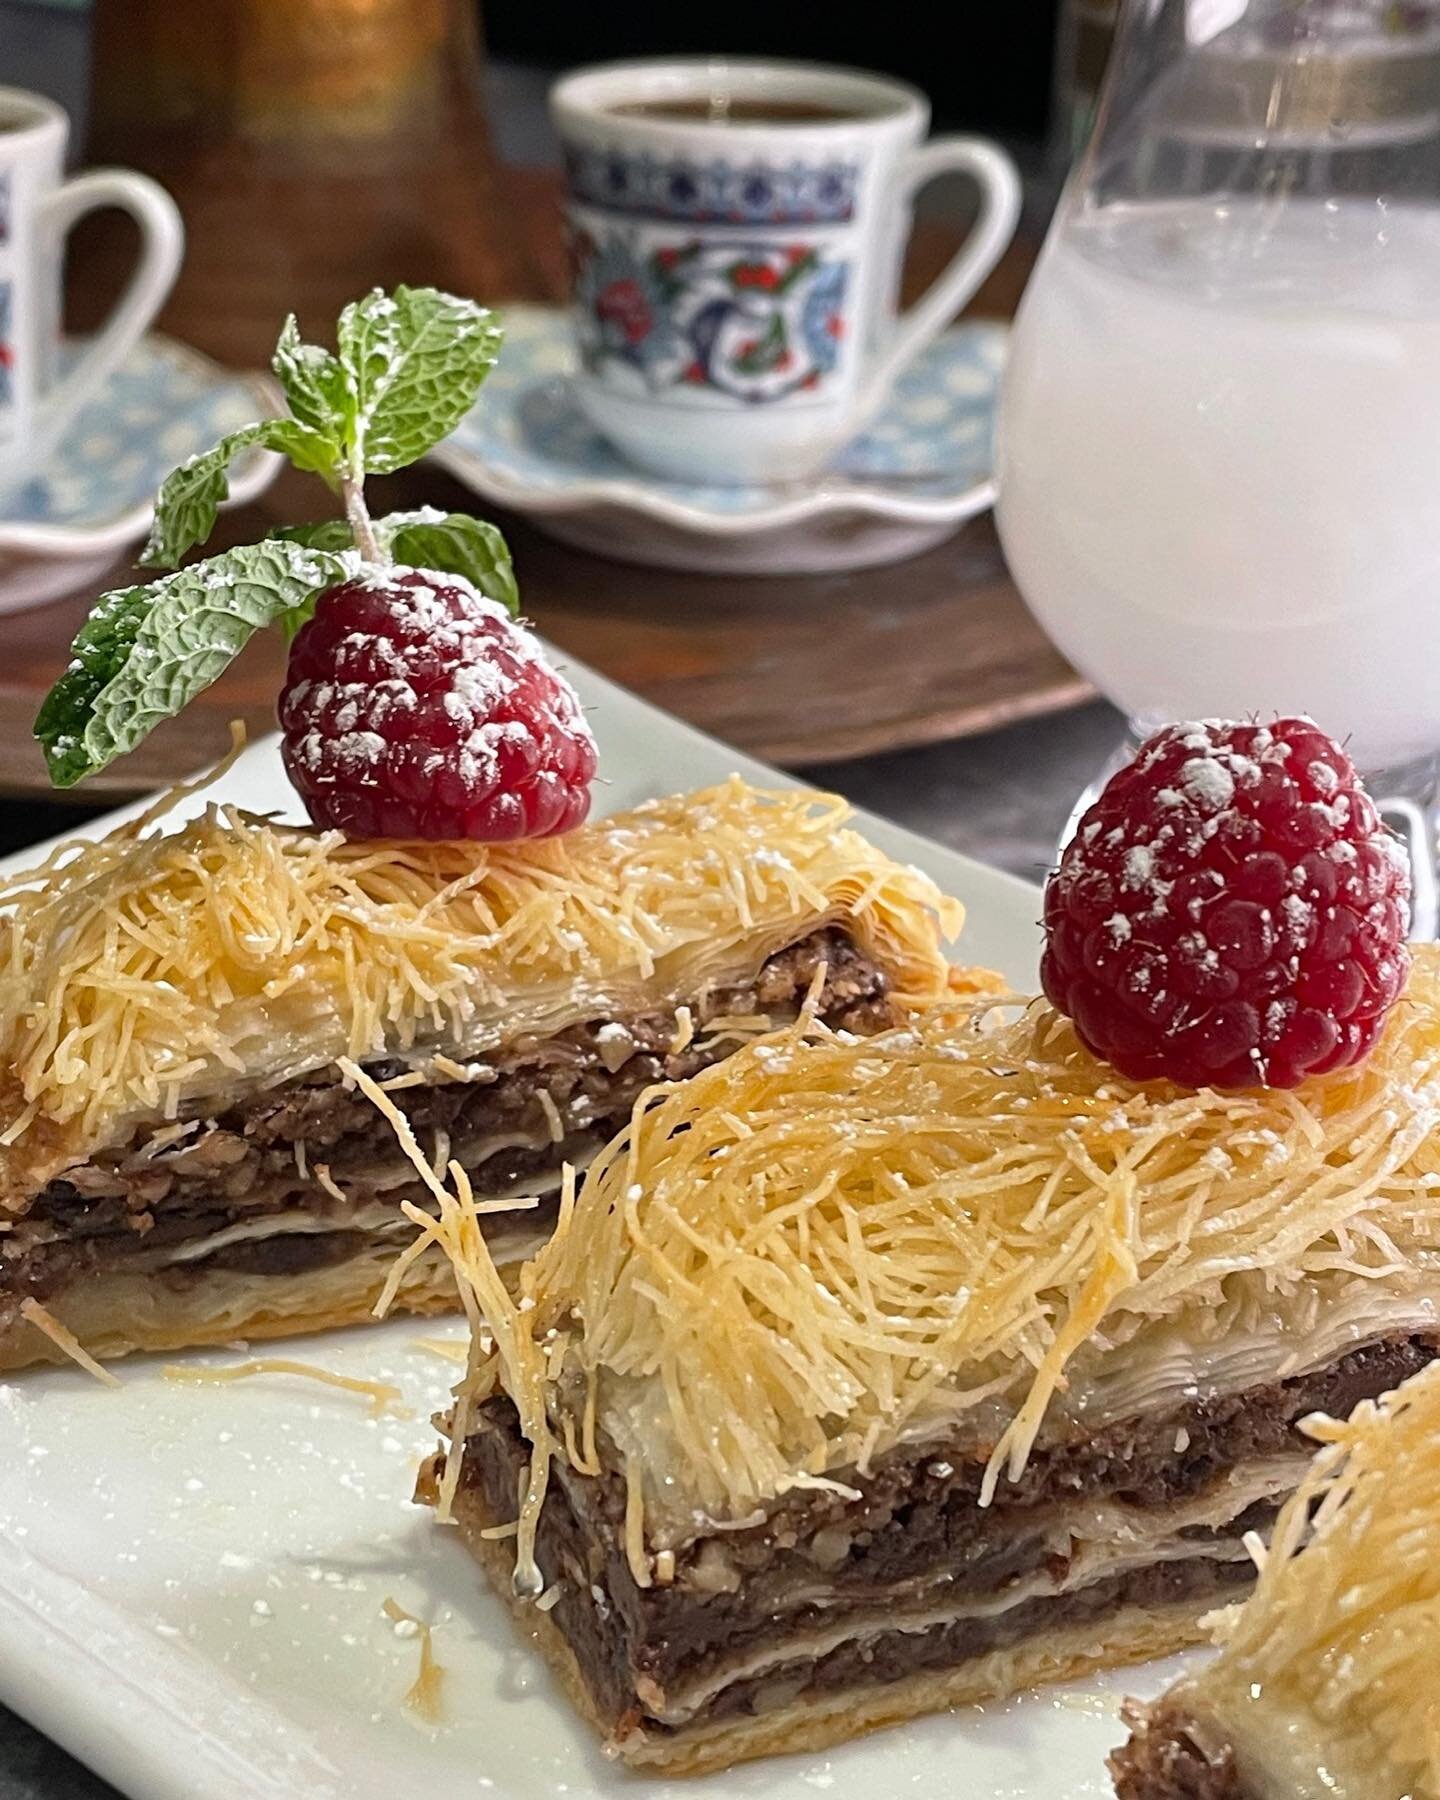 What better way to treat yourself this weekend then with one of our delicious Baklava desserts!!! Come in today to get your fix🤩🤩🤩 #baklava #10e #10erestaurant #armenianfood #lebanesefood #mediterraneanfood #dtla #dtlafoodie #dtlarestaurant